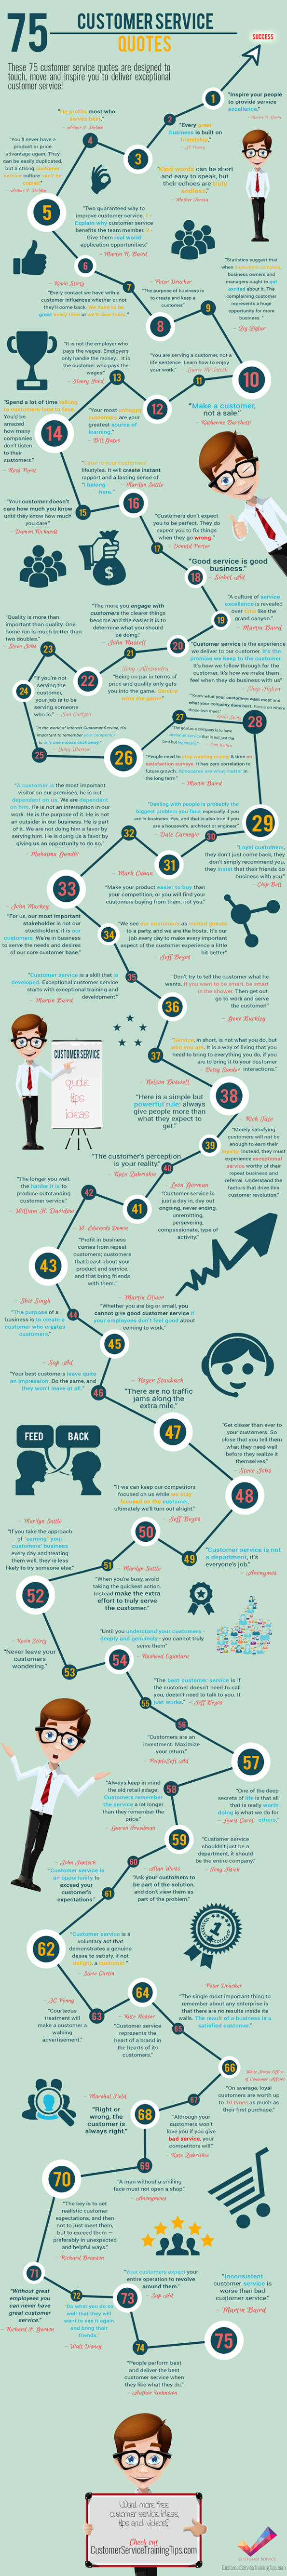 75-inspiring-customer-service-quotes-to-live-by-infographic-image